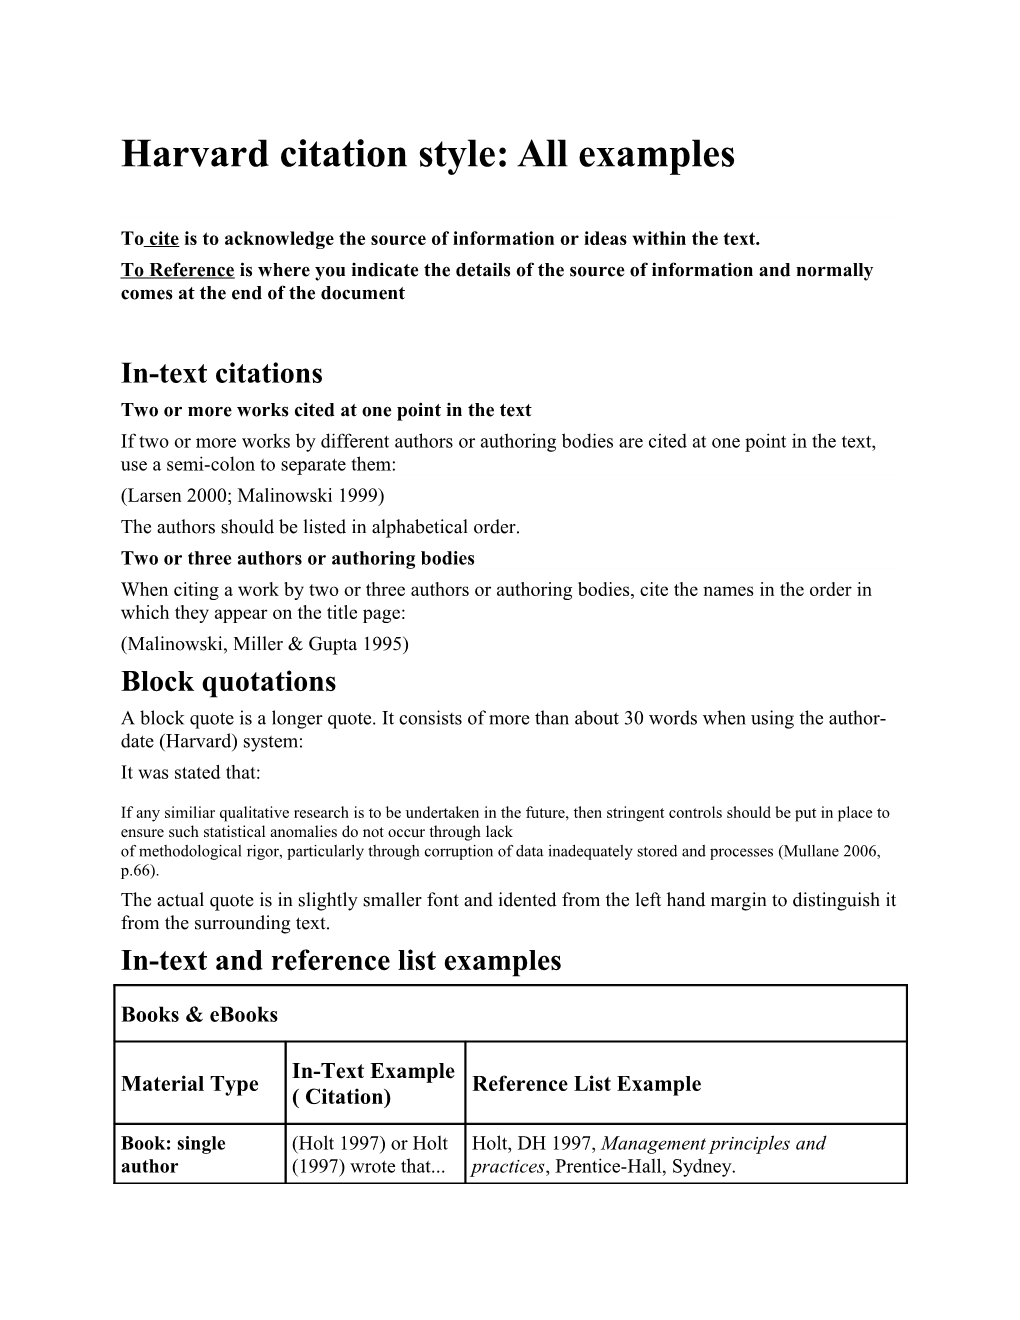 Harvard Citation Style: All Examples